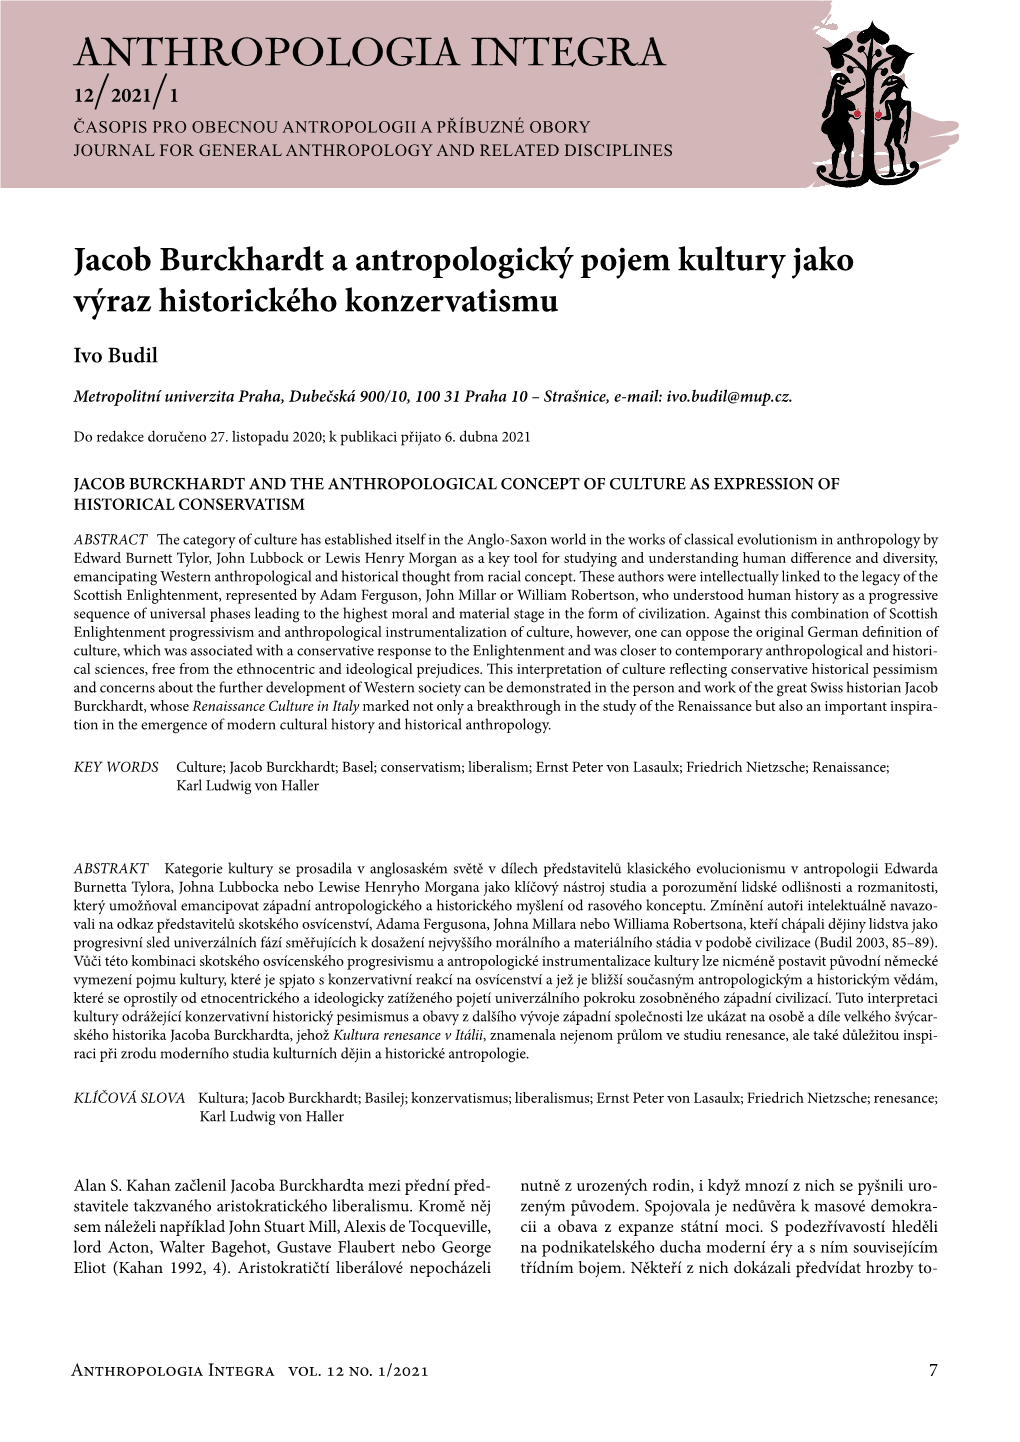 Anthropologia Integra 12/2021/1 Časopis Pro Obecnou Antropologii a Příbuzné Obory Journal for General Anthropology and Related Disciplines